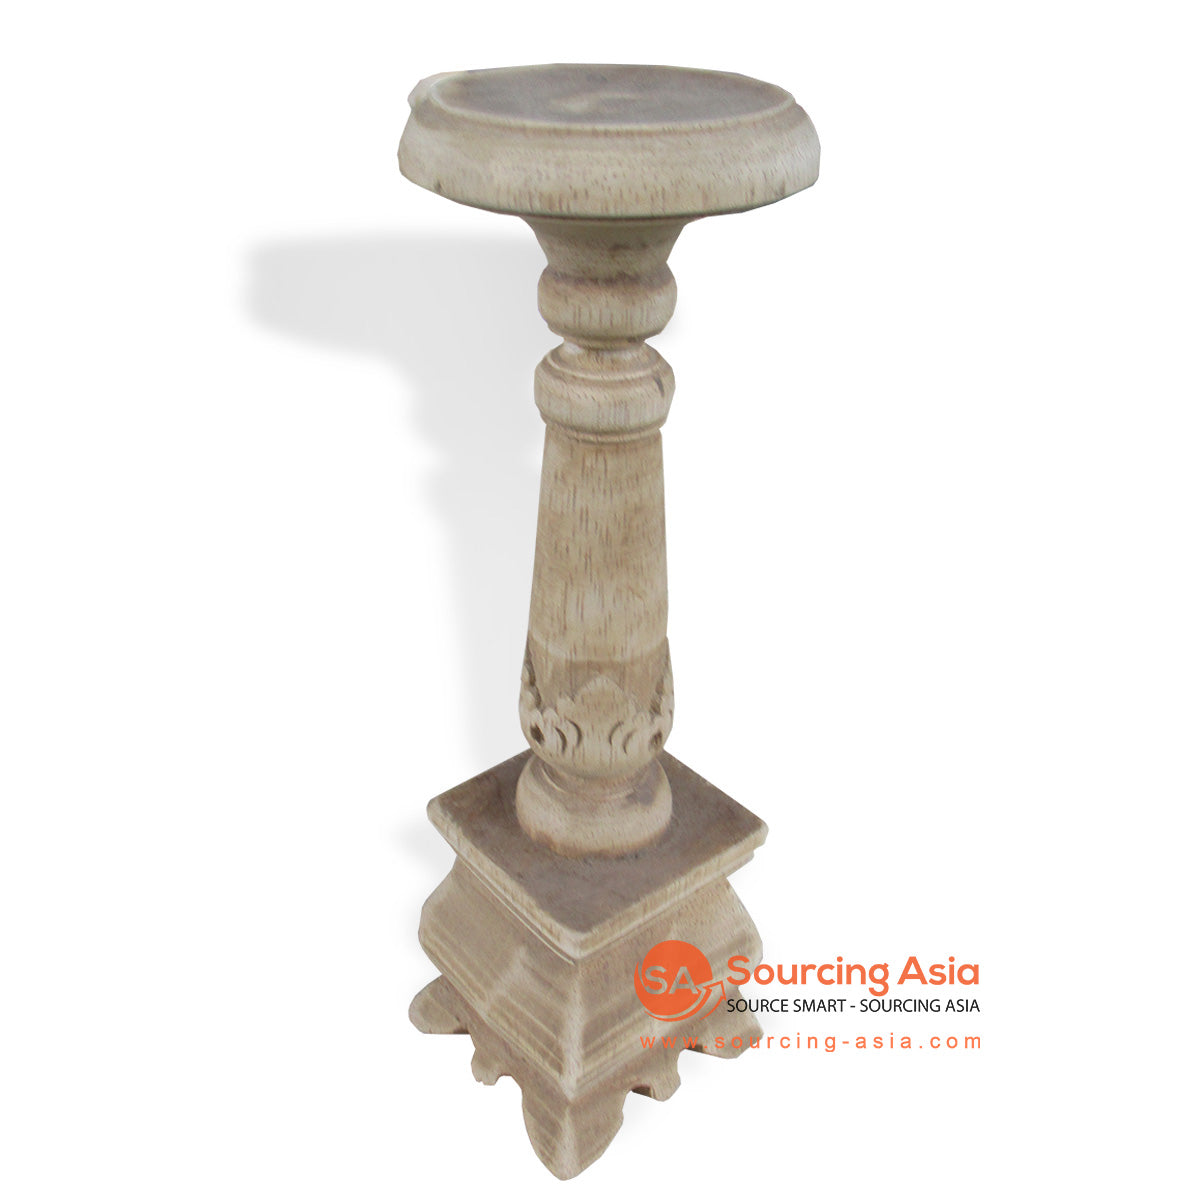 CHWD077-25 WOODEN CANDLE HOLDER